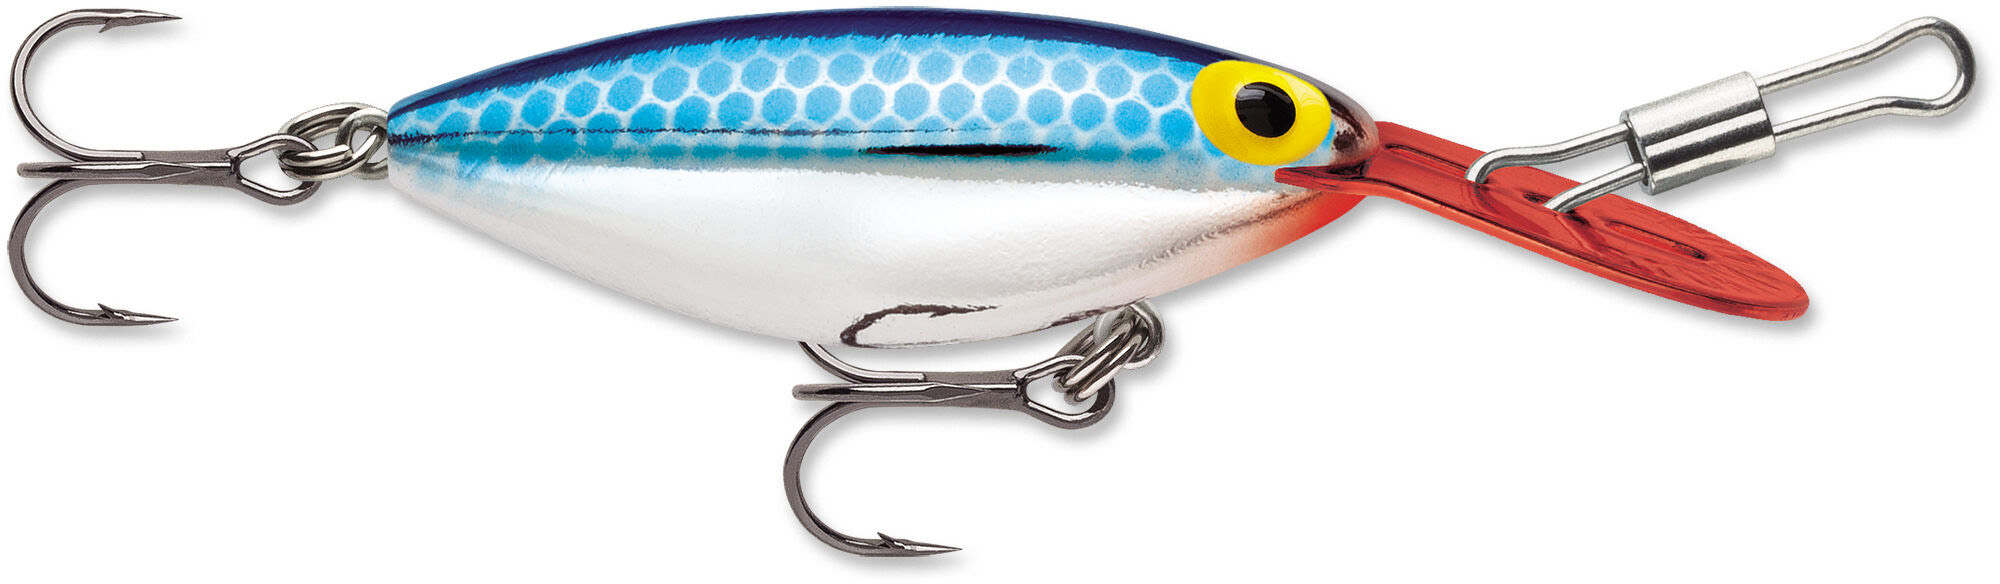 Storm Original Hot 'N Tot 05 Hard Bait  Up to 26% Off Free Shipping over  $49!